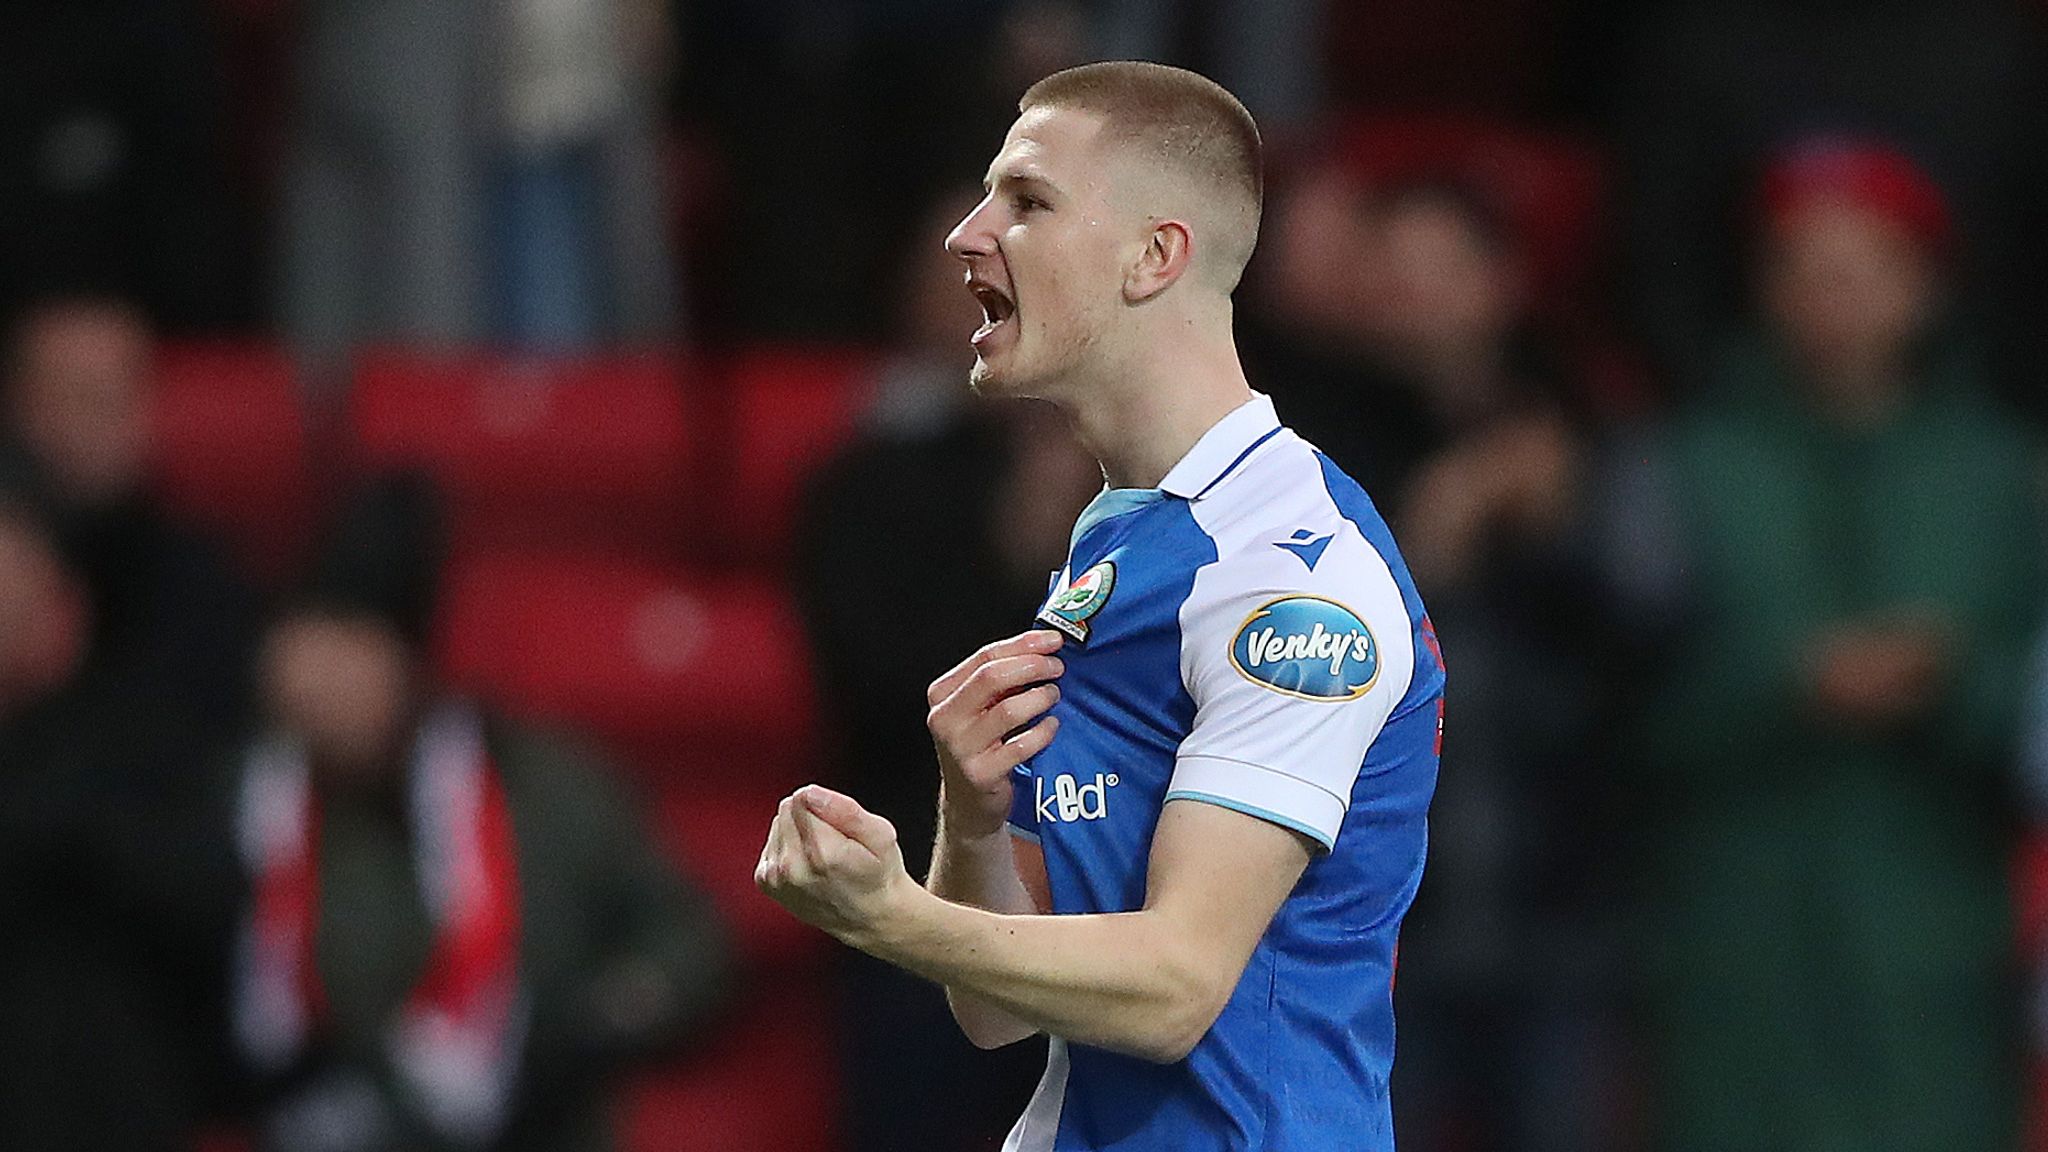  Adam Wharton of Blackburn Rovers celebrates scoring a goal during the match against Crystal Palace.